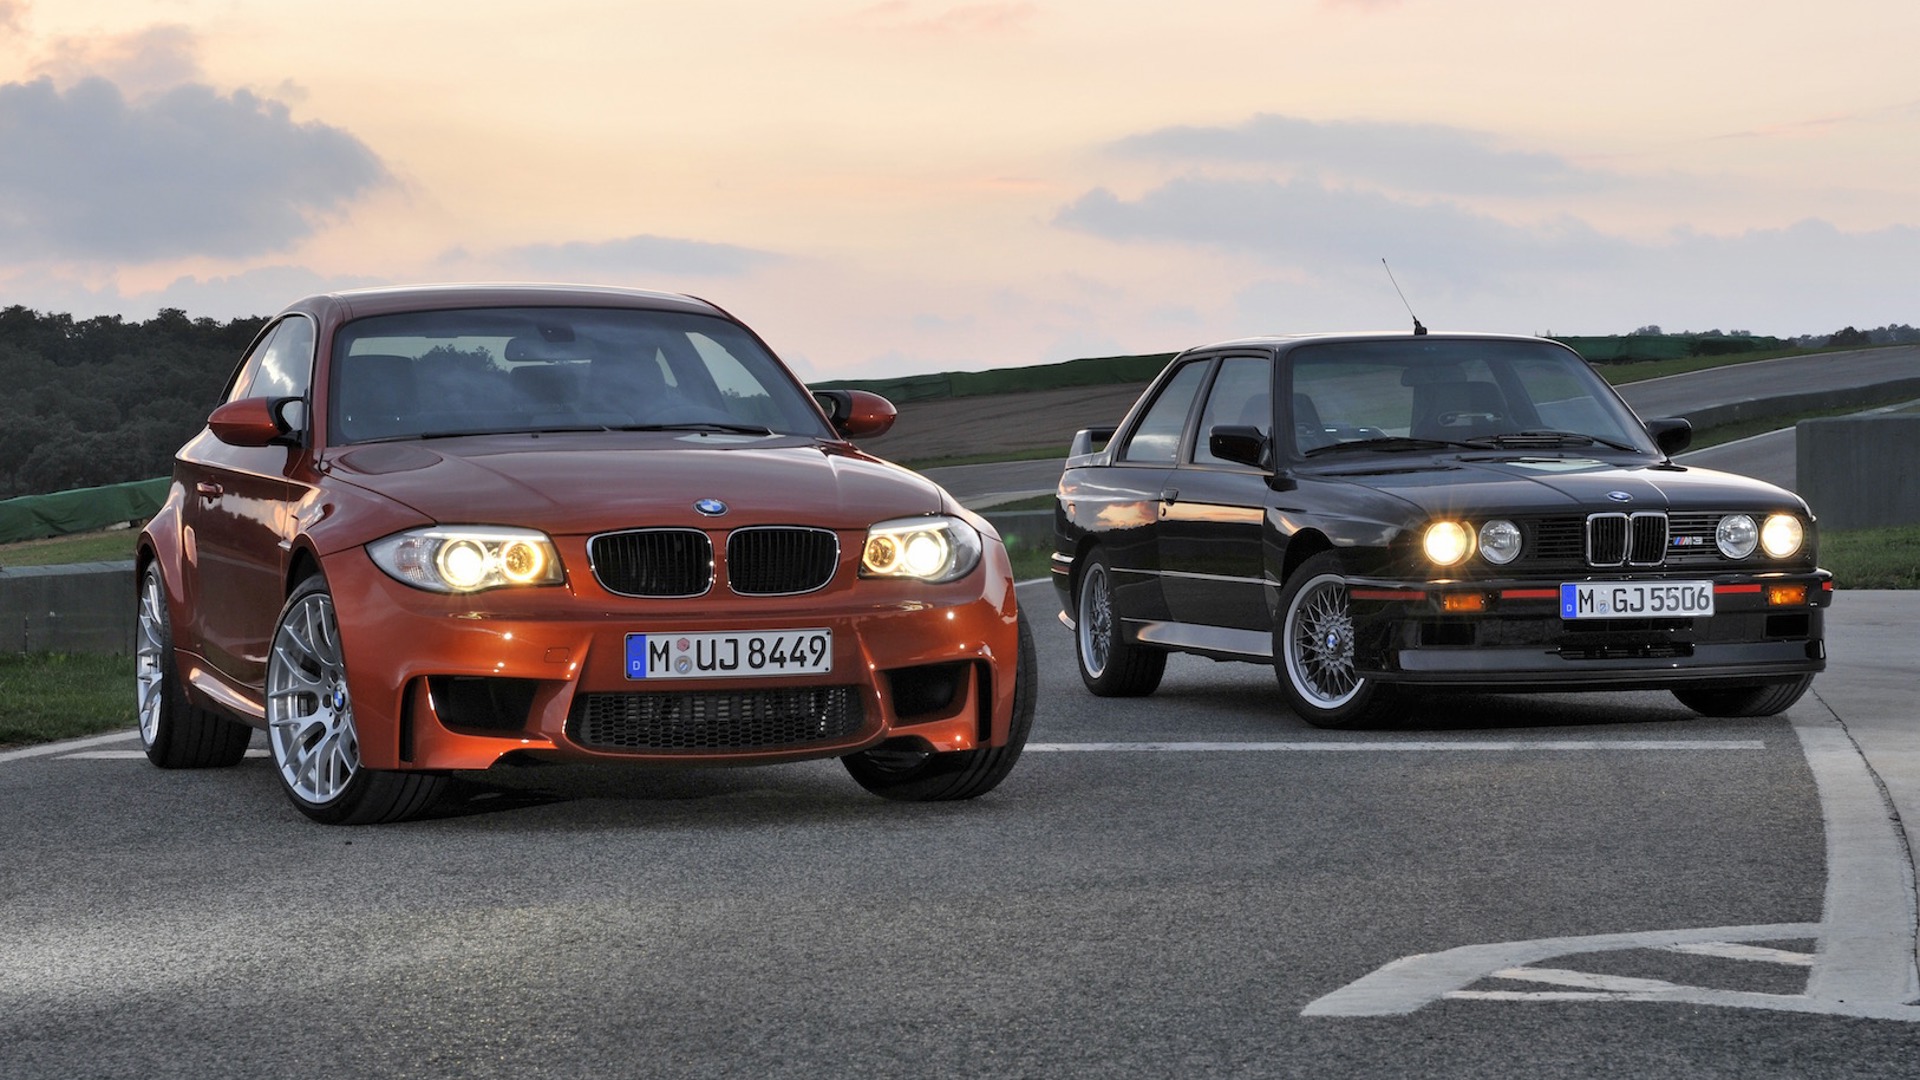 BMW 1 Series M Coupe and BMW M3 Sport Evolution.